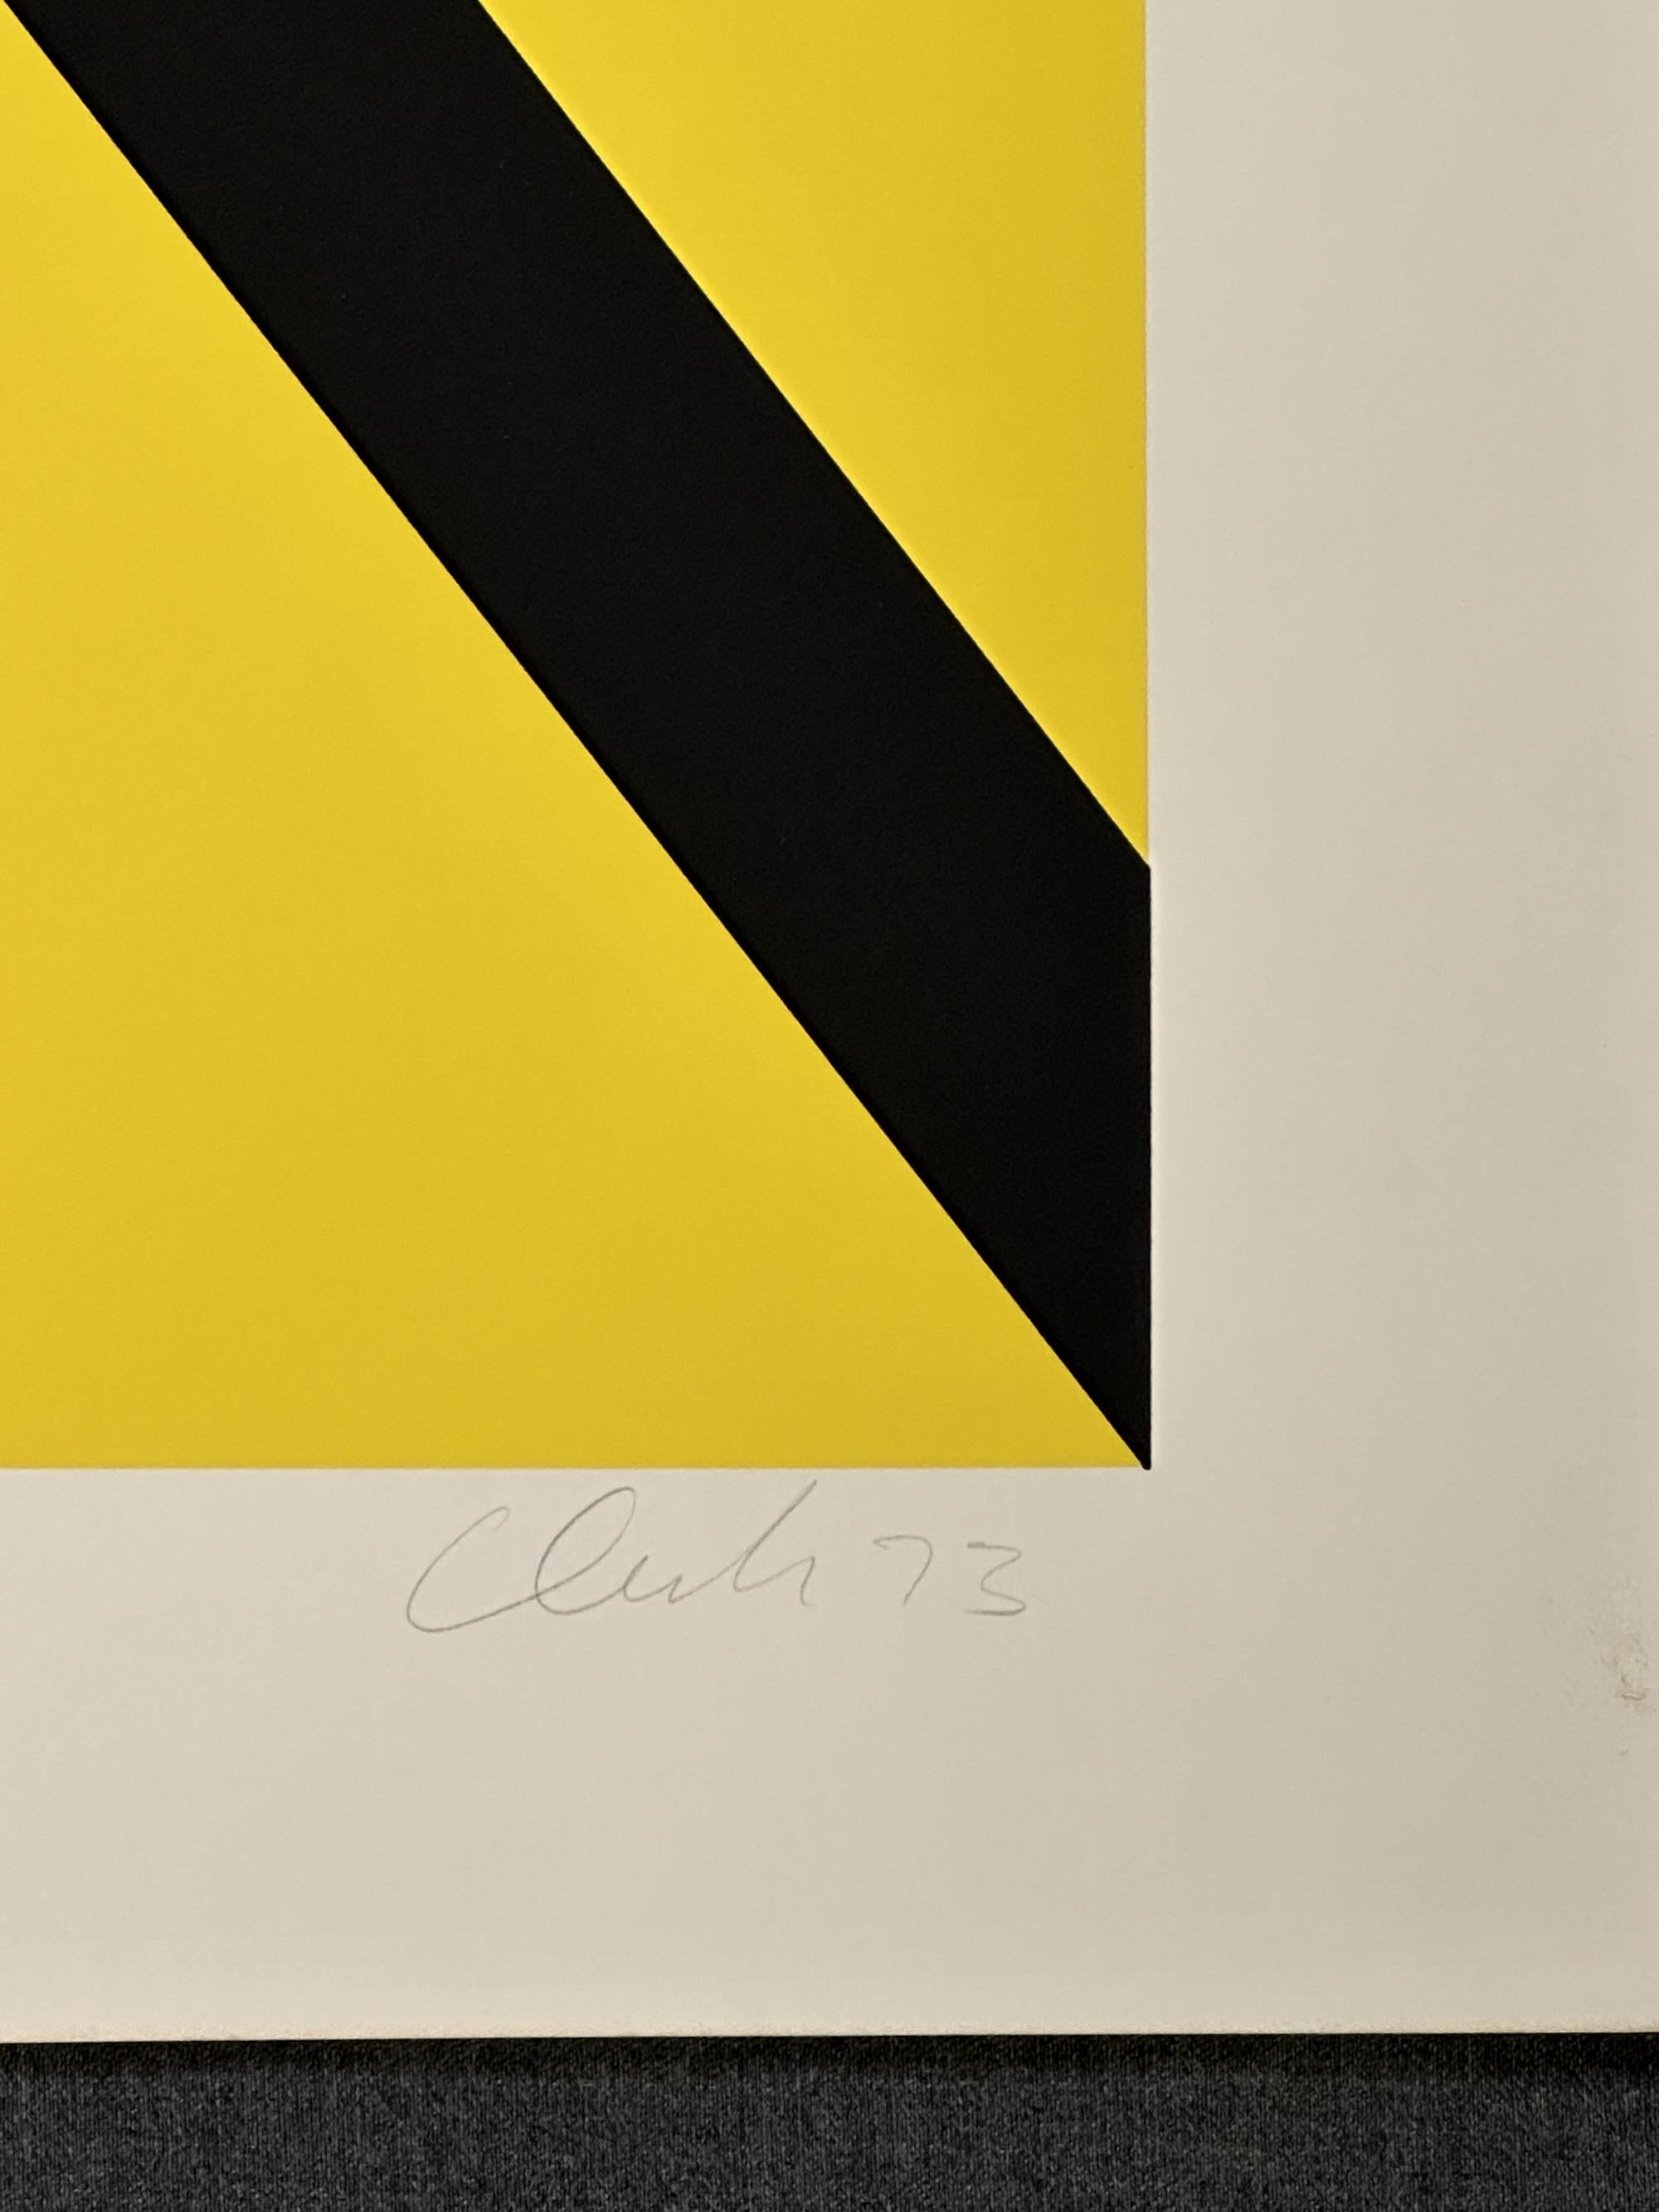 Pierre Clerk Plate V Yellow-Red 1973 Signed Limited Edition Silkscreen For Sale 4